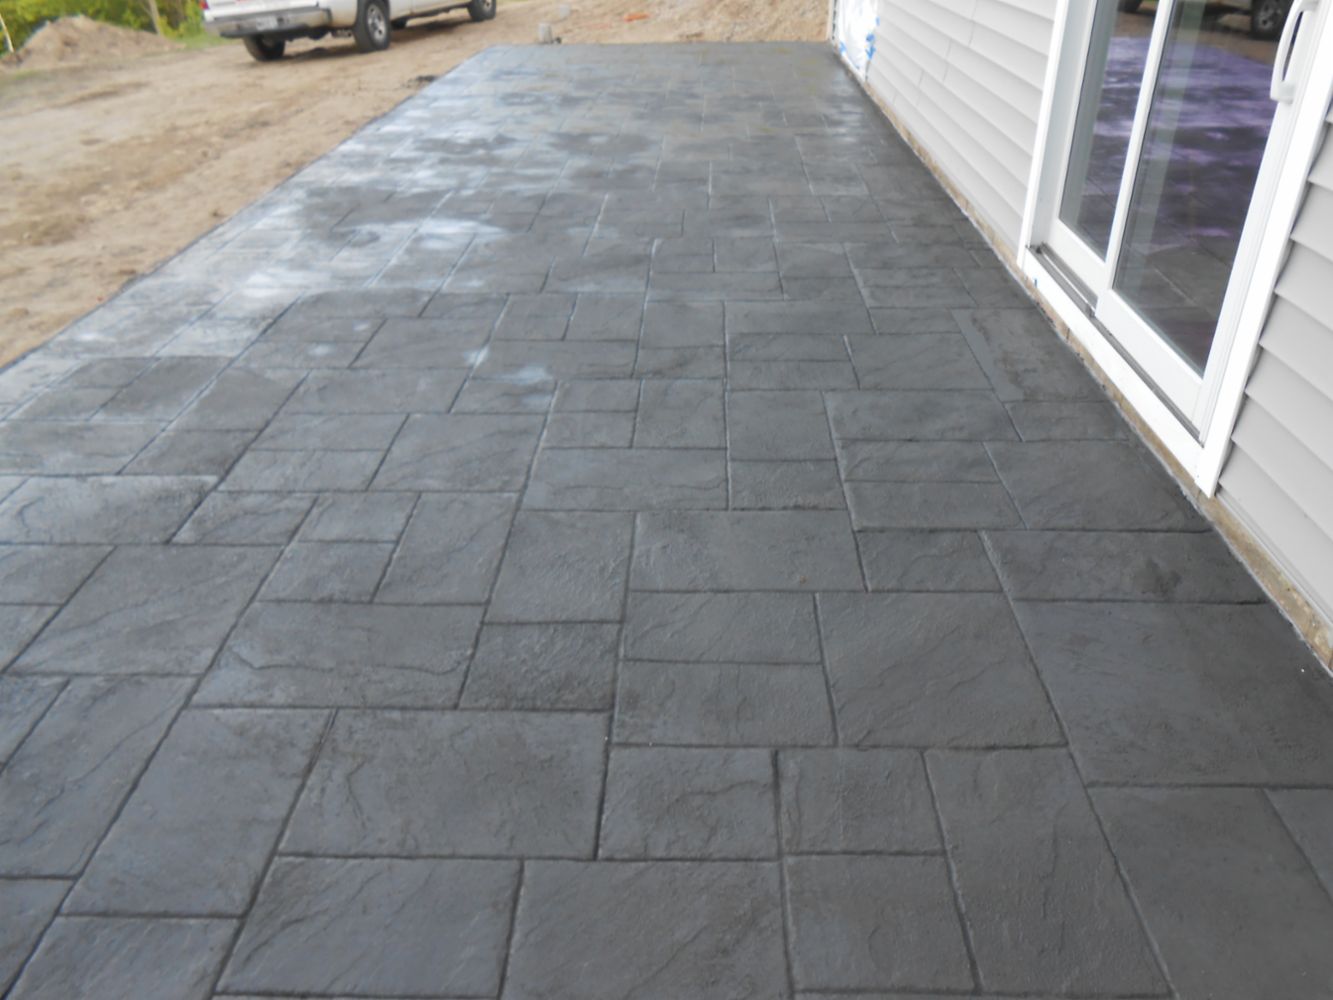 Concrete Floors & Garage Slabs Specialist in Augusta, ME - Provenchers ...